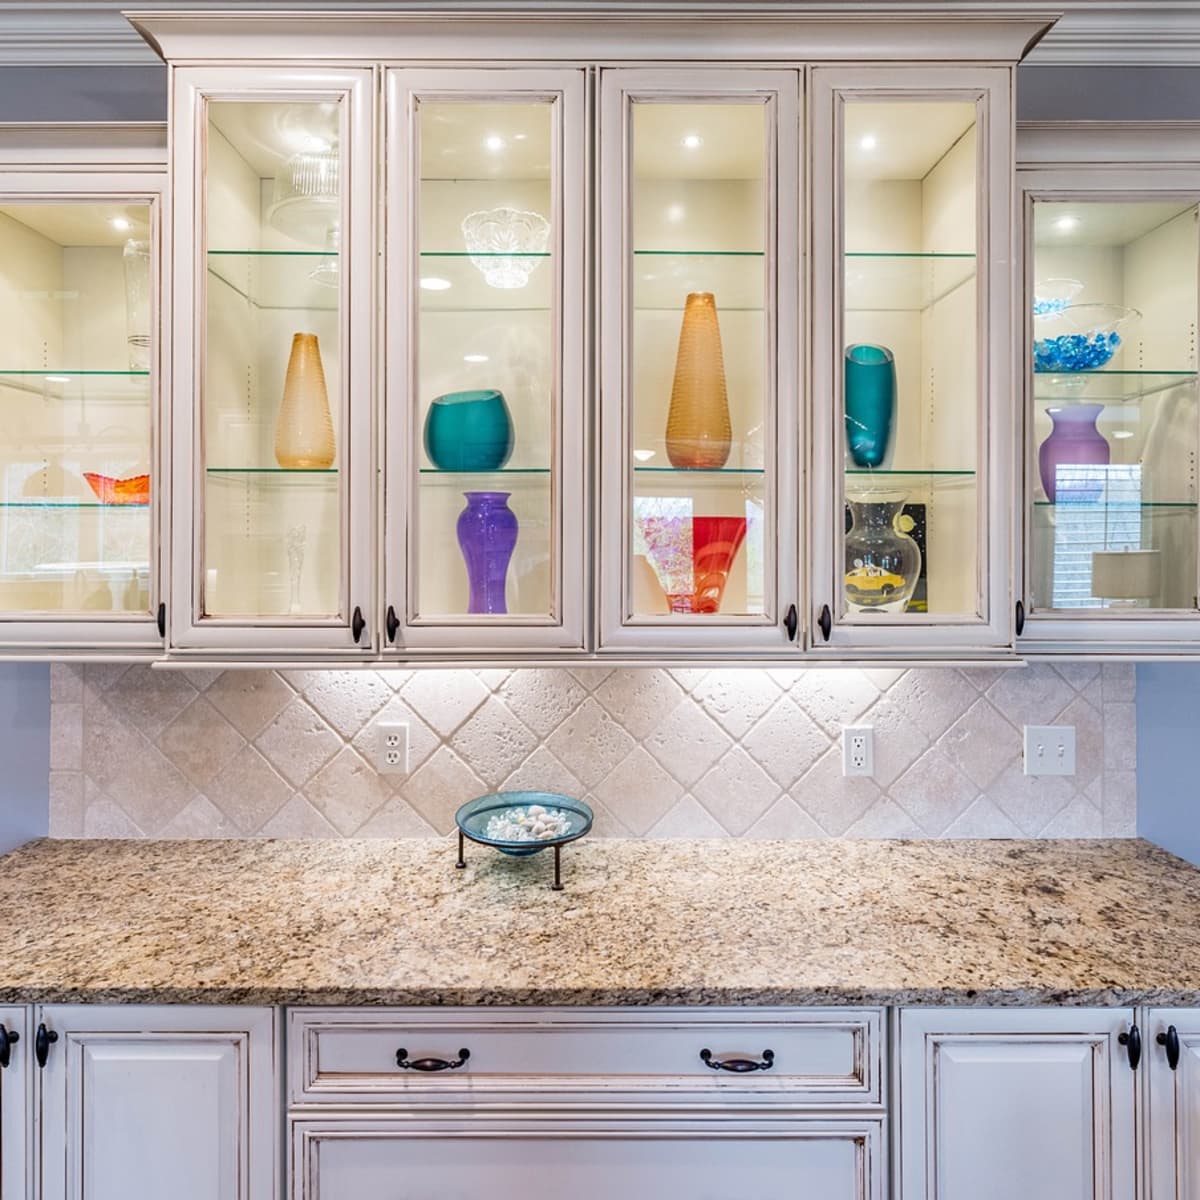 How to Decorate the Top of Your Kitchen Cabinets